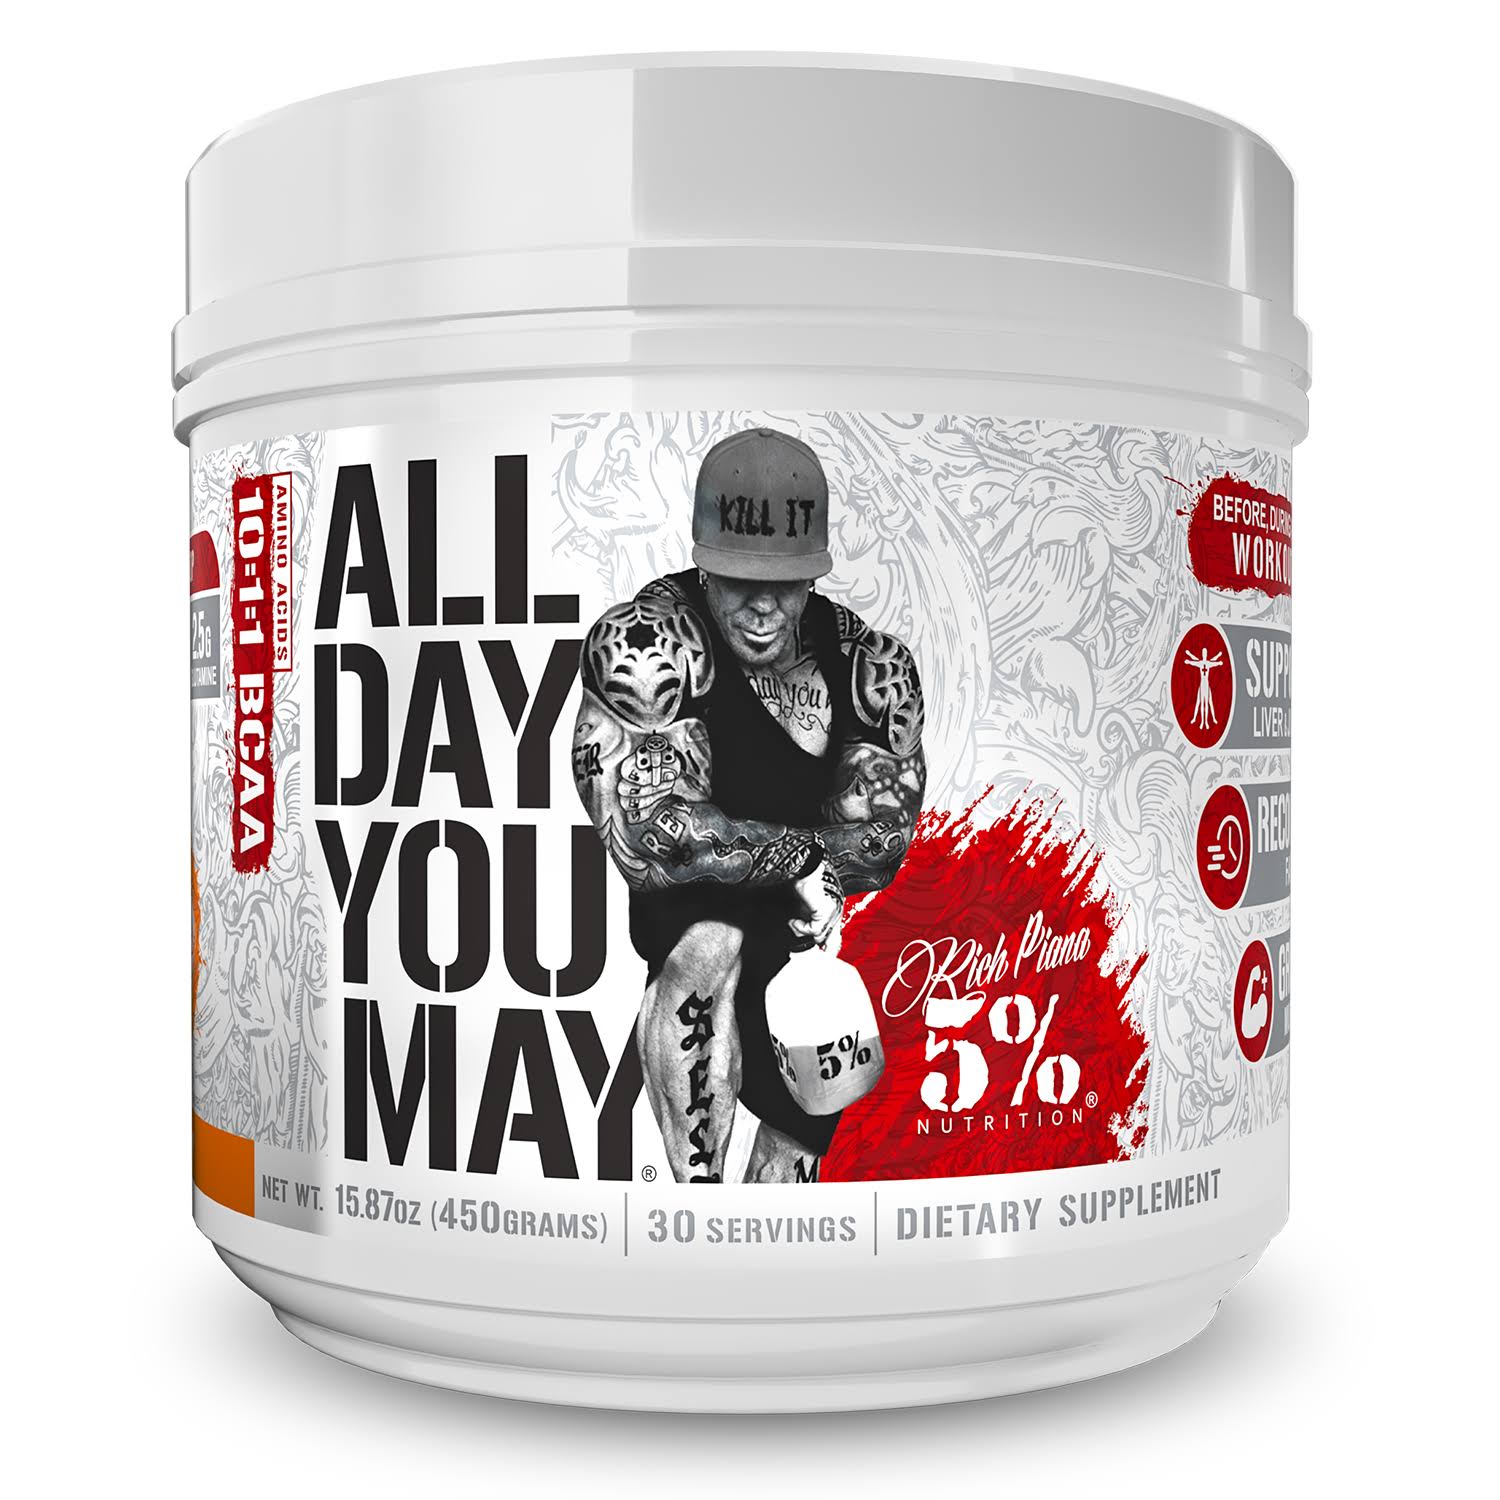 5% Nutrition All Day You May Push Pop - 30 Servings